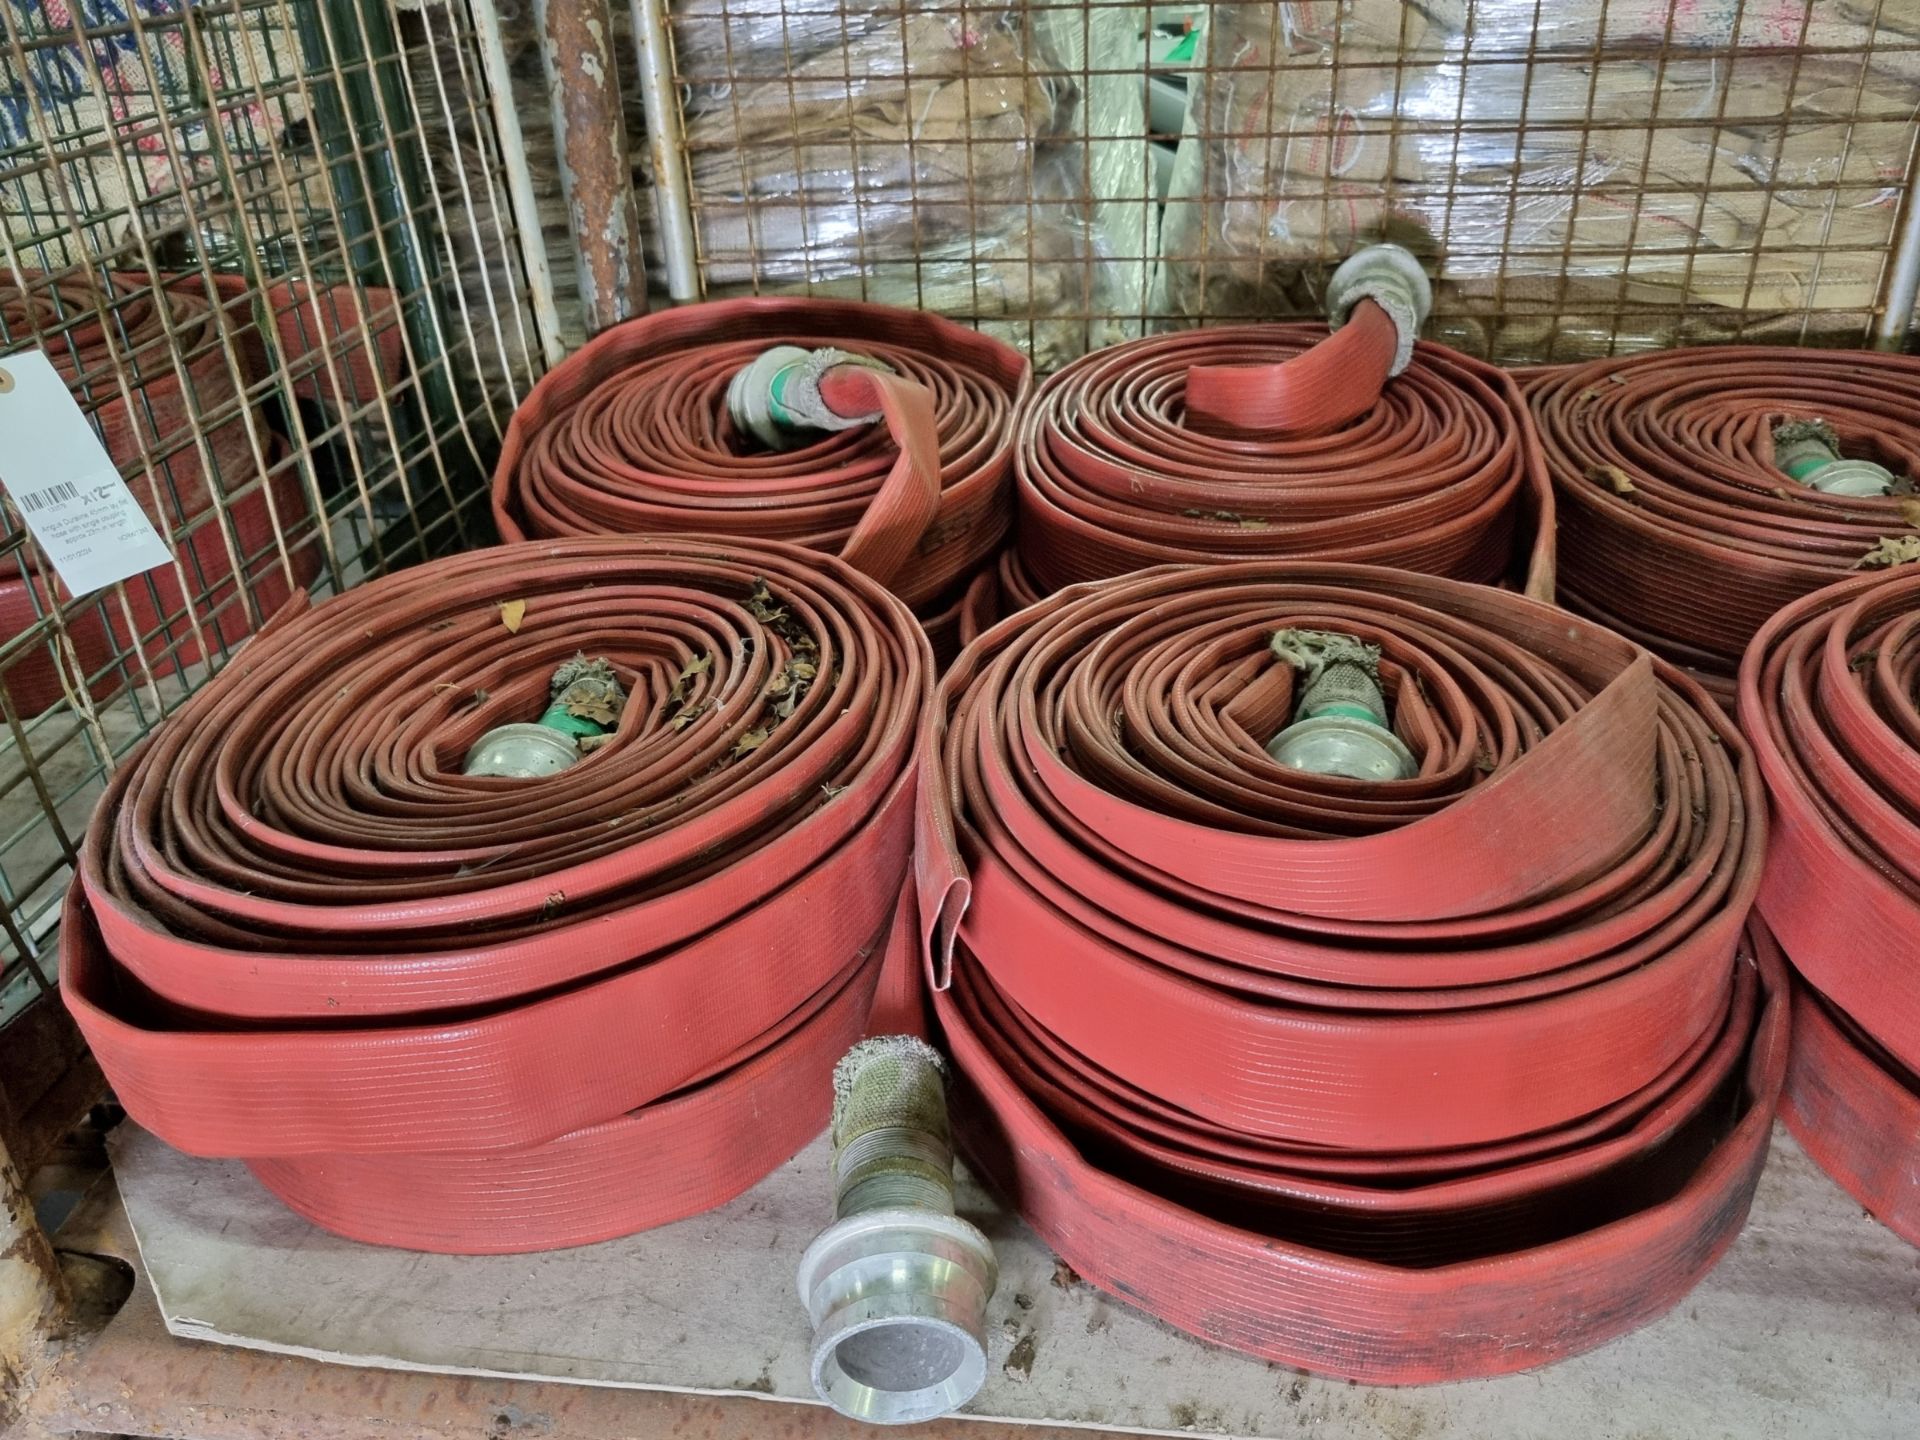 12x Angus Duraline 45mm lay flat hoses with single coupling - approx 23m in length - Image 4 of 4